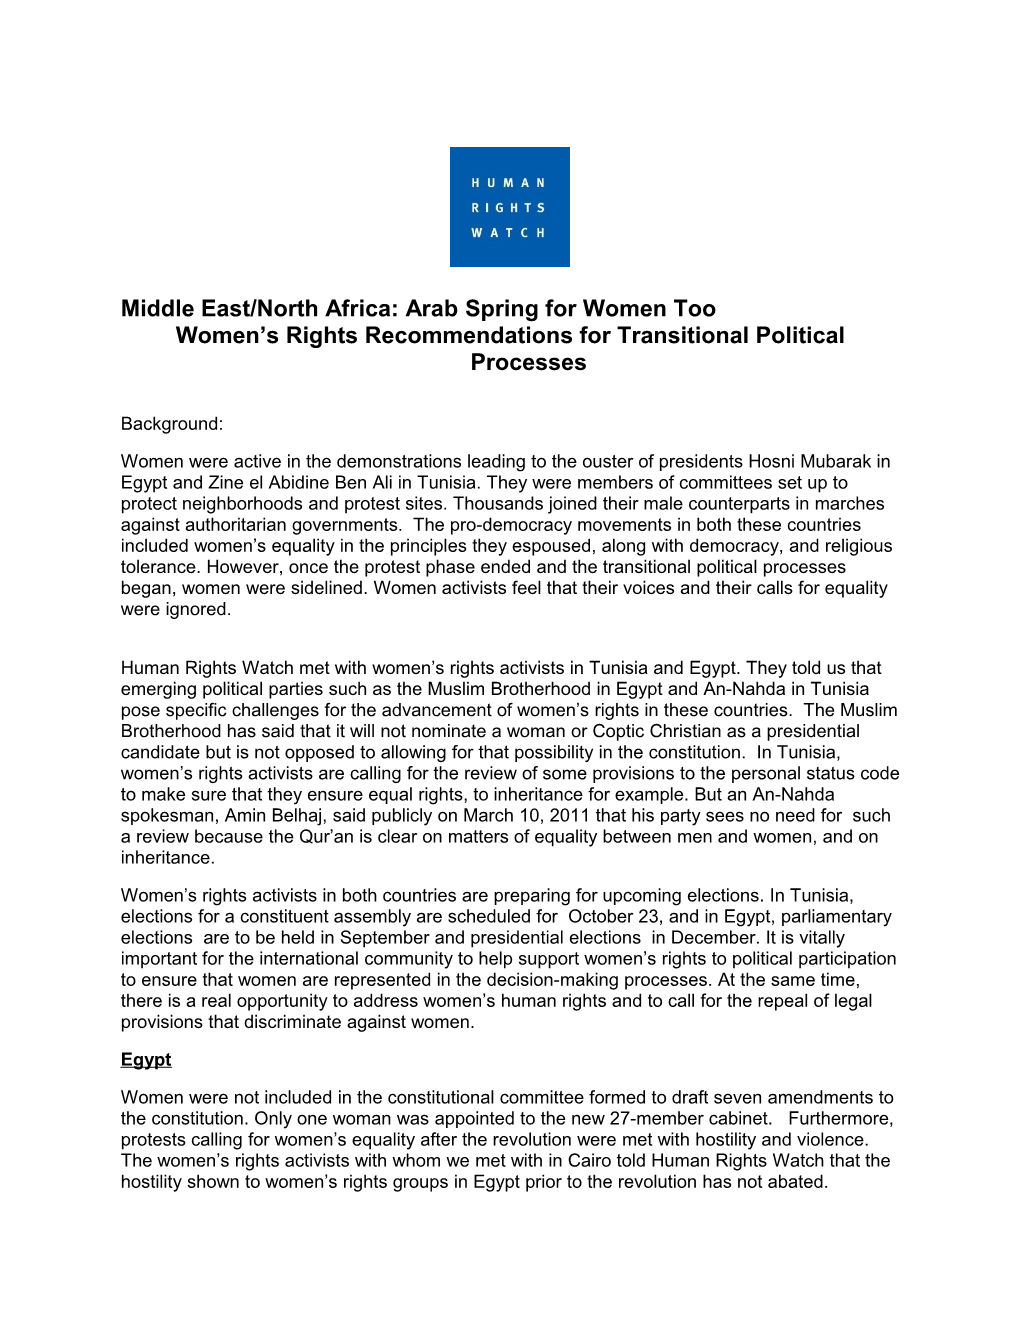 Women S Rights in Transitional Political Processes and Recommendations